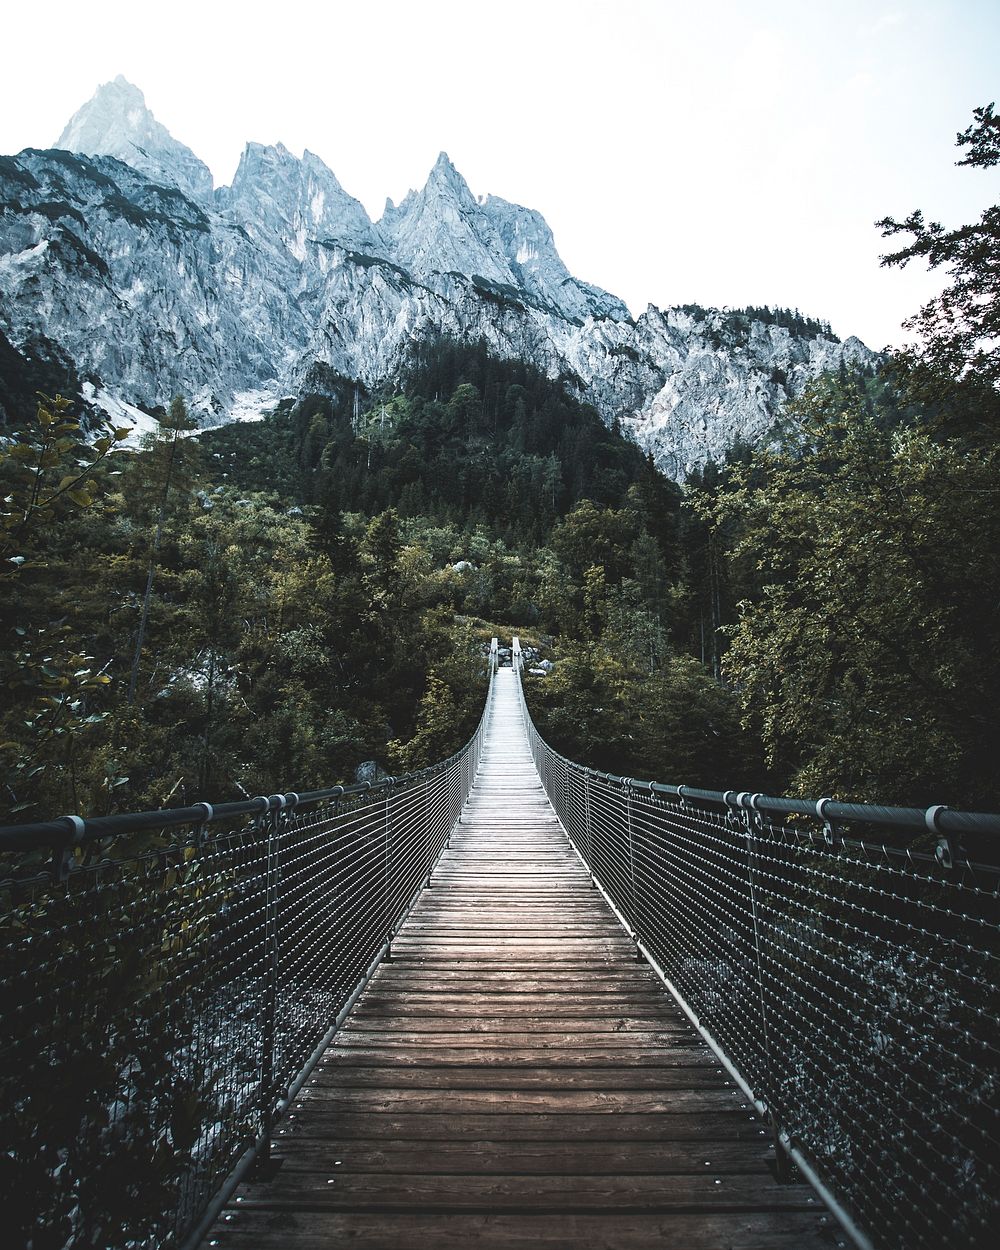 Suspension bridge with a view of Reiter Alpe mountain in Bavaria, Germany